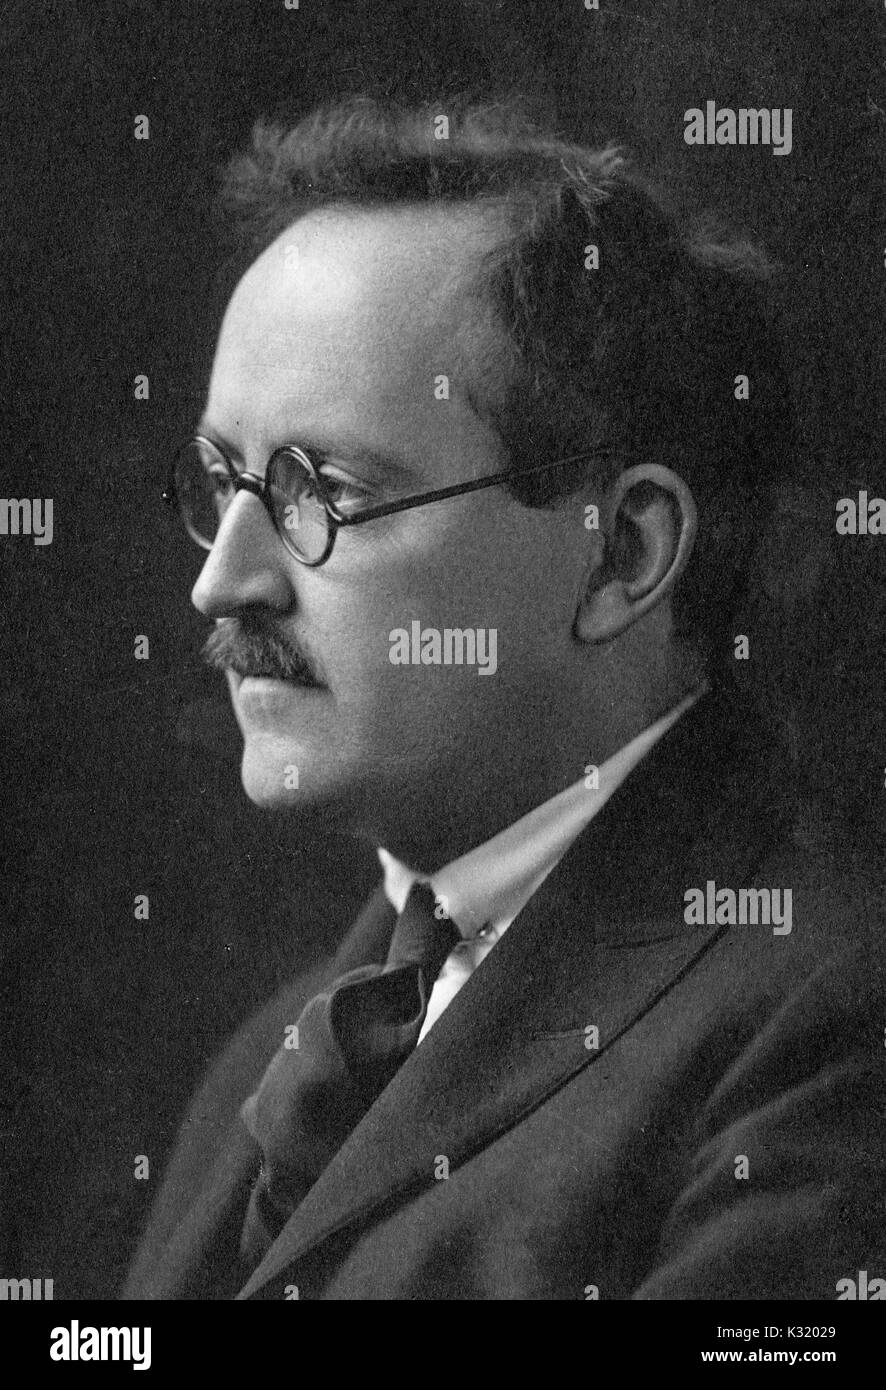 Sepia portrait photograph, profile and shoulders up, of Samuel Claggett Chew, published fellow and professor of English and French at Johns Hopkins University, wearing glasses, tie, and jacket, Baltimore, Maryland, 1927. Stock Photo